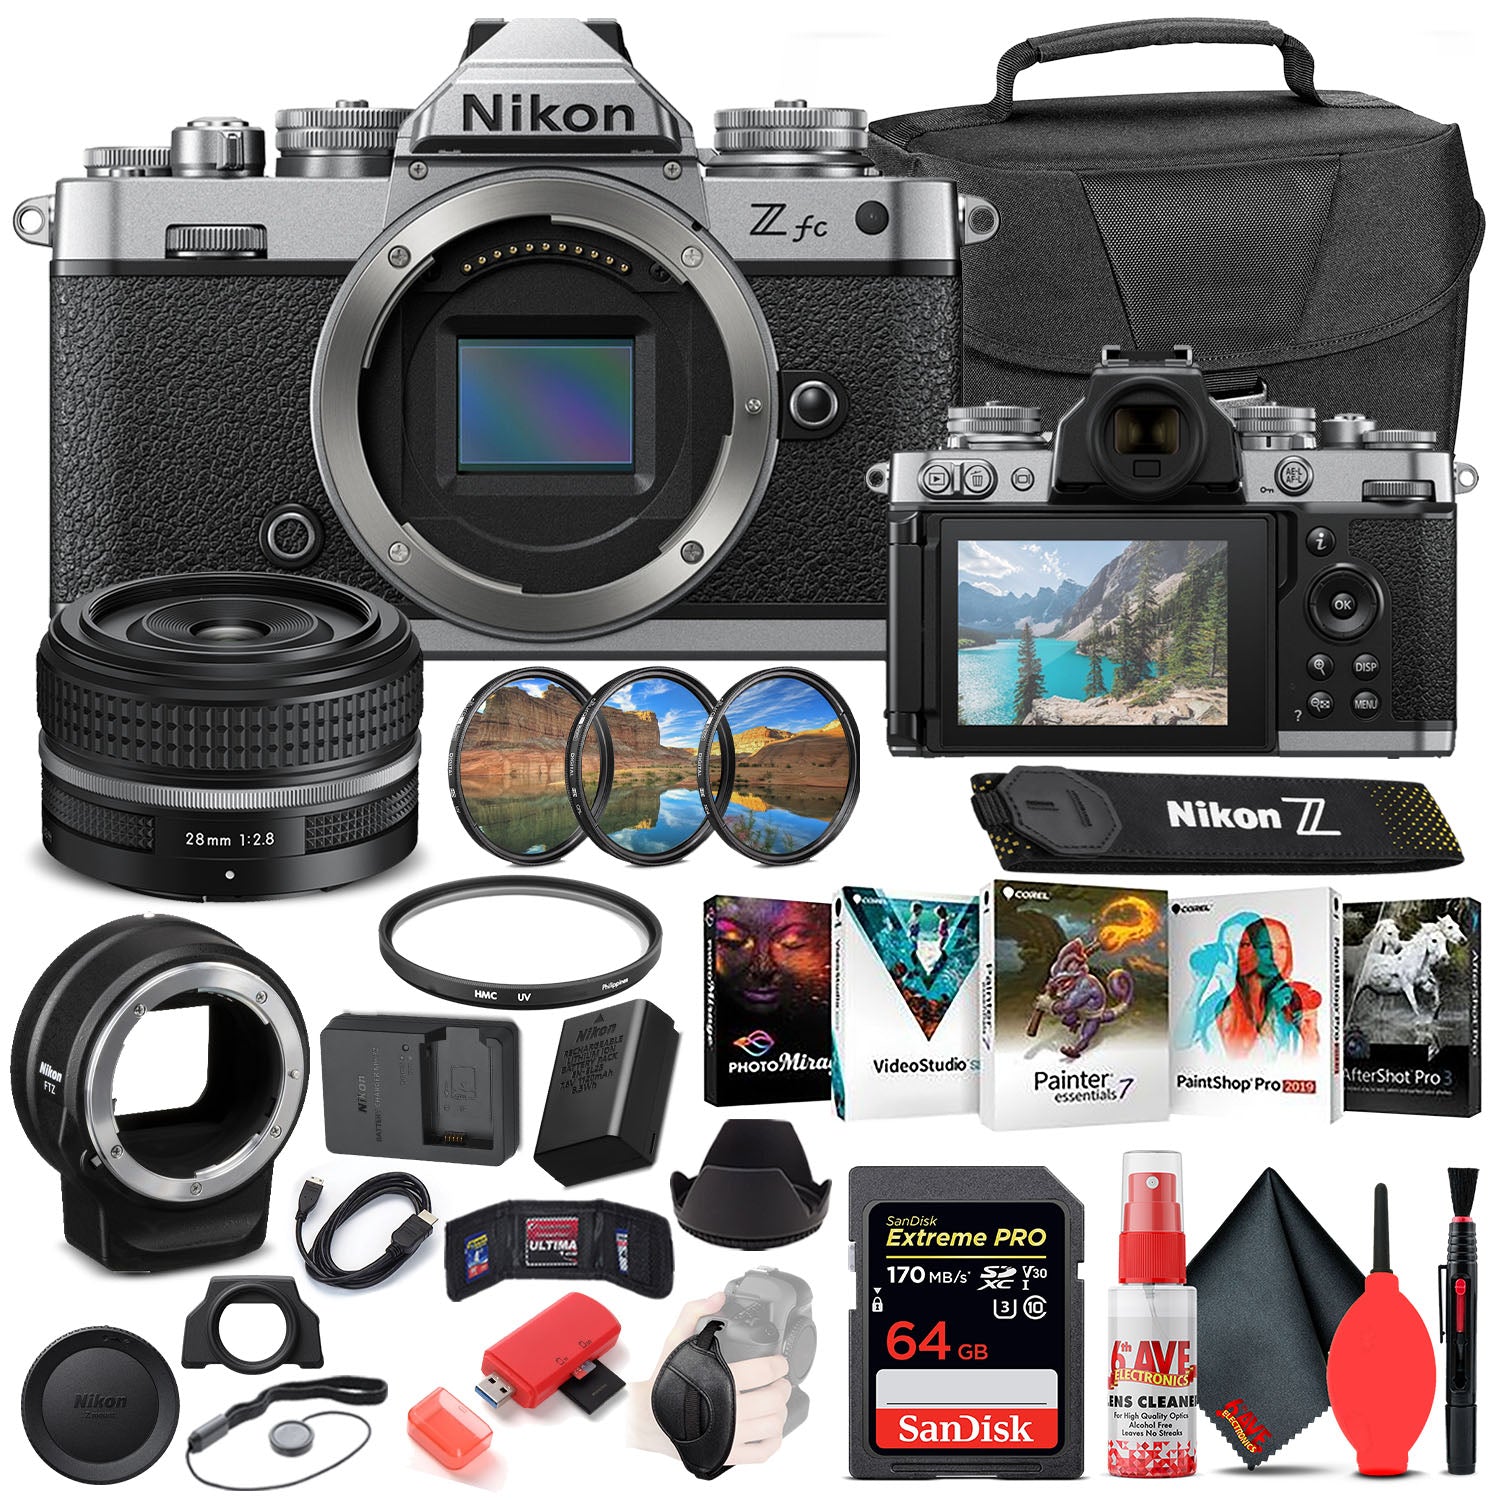 Nikon Z fc Digital Camera with 28mm Lens INTL Bundle with FTZ Adapter -